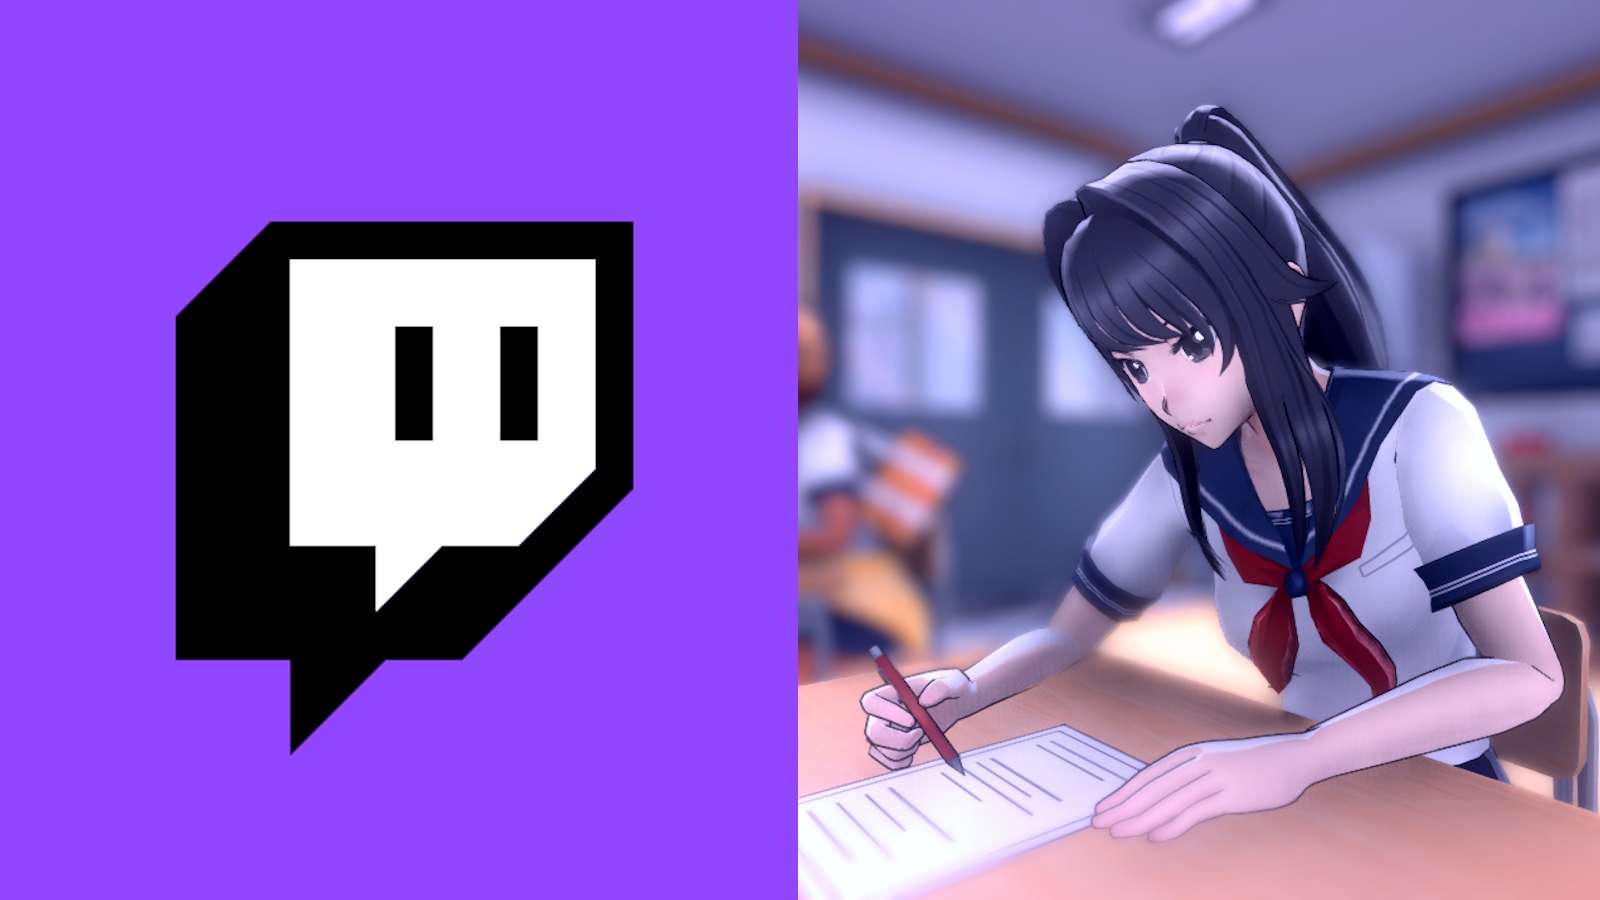 Yandere Dev banned on Twitch one month after grooming allegations surface.